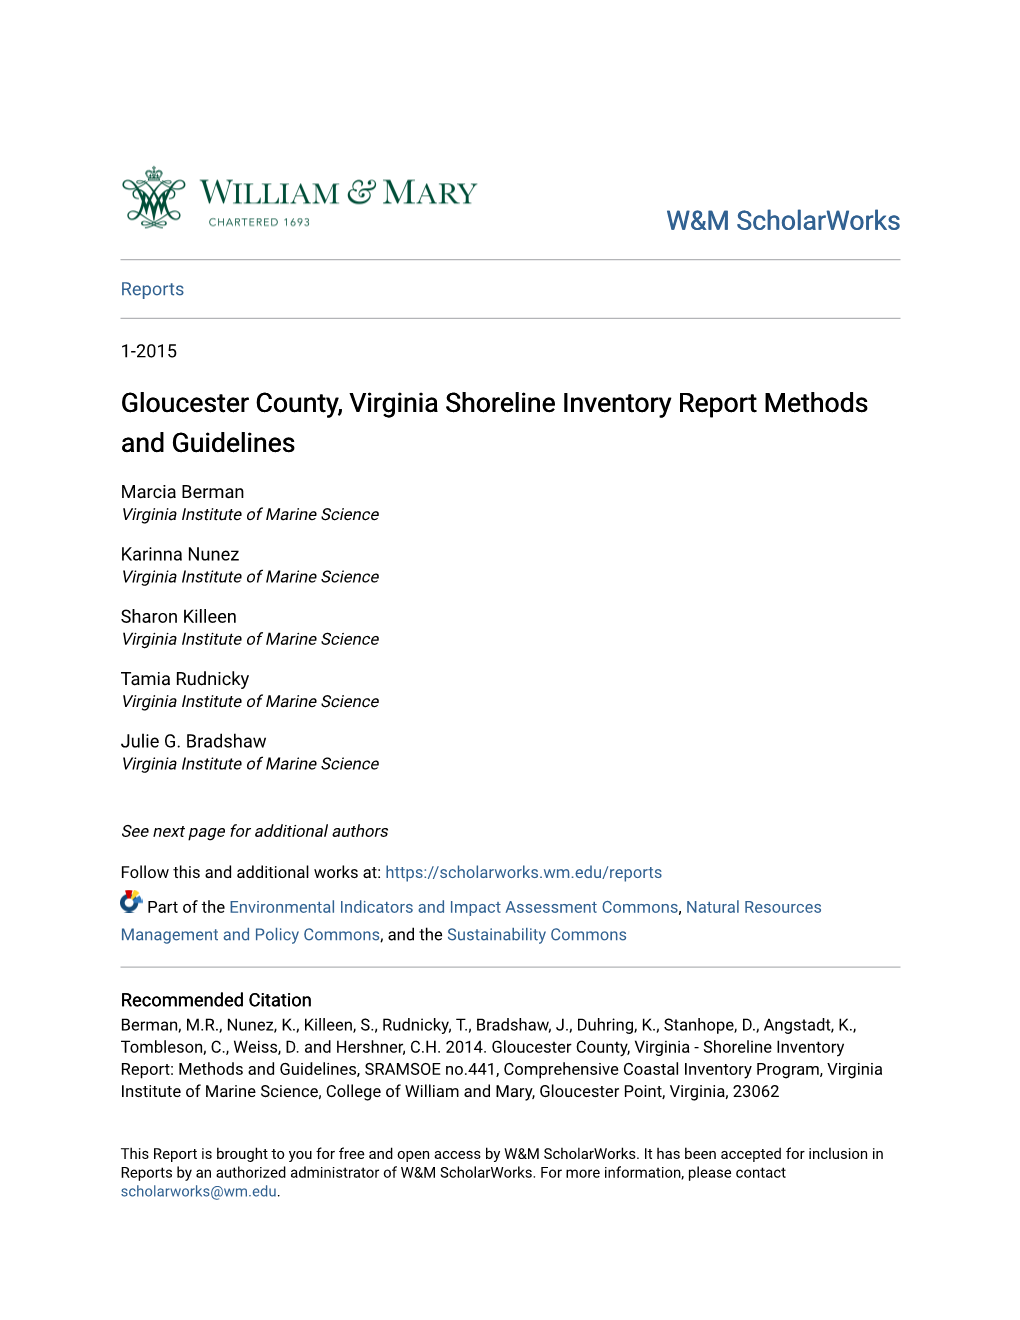 Gloucester County, Virginia Shoreline Inventory Report Methods and Guidelines